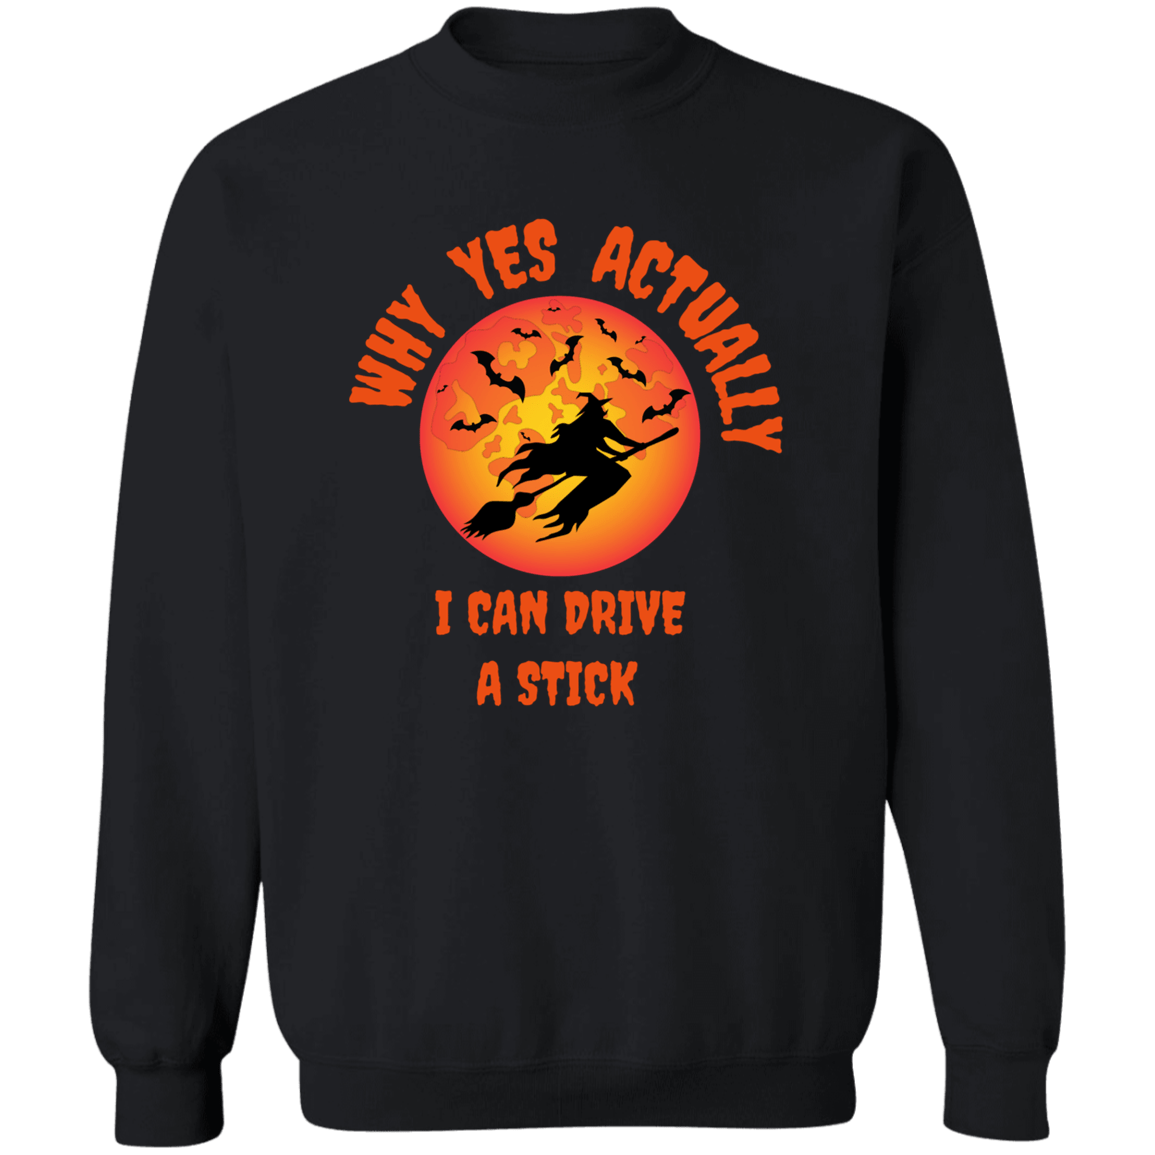 Why Yes, I Can Drive a Stick Sweatshirt